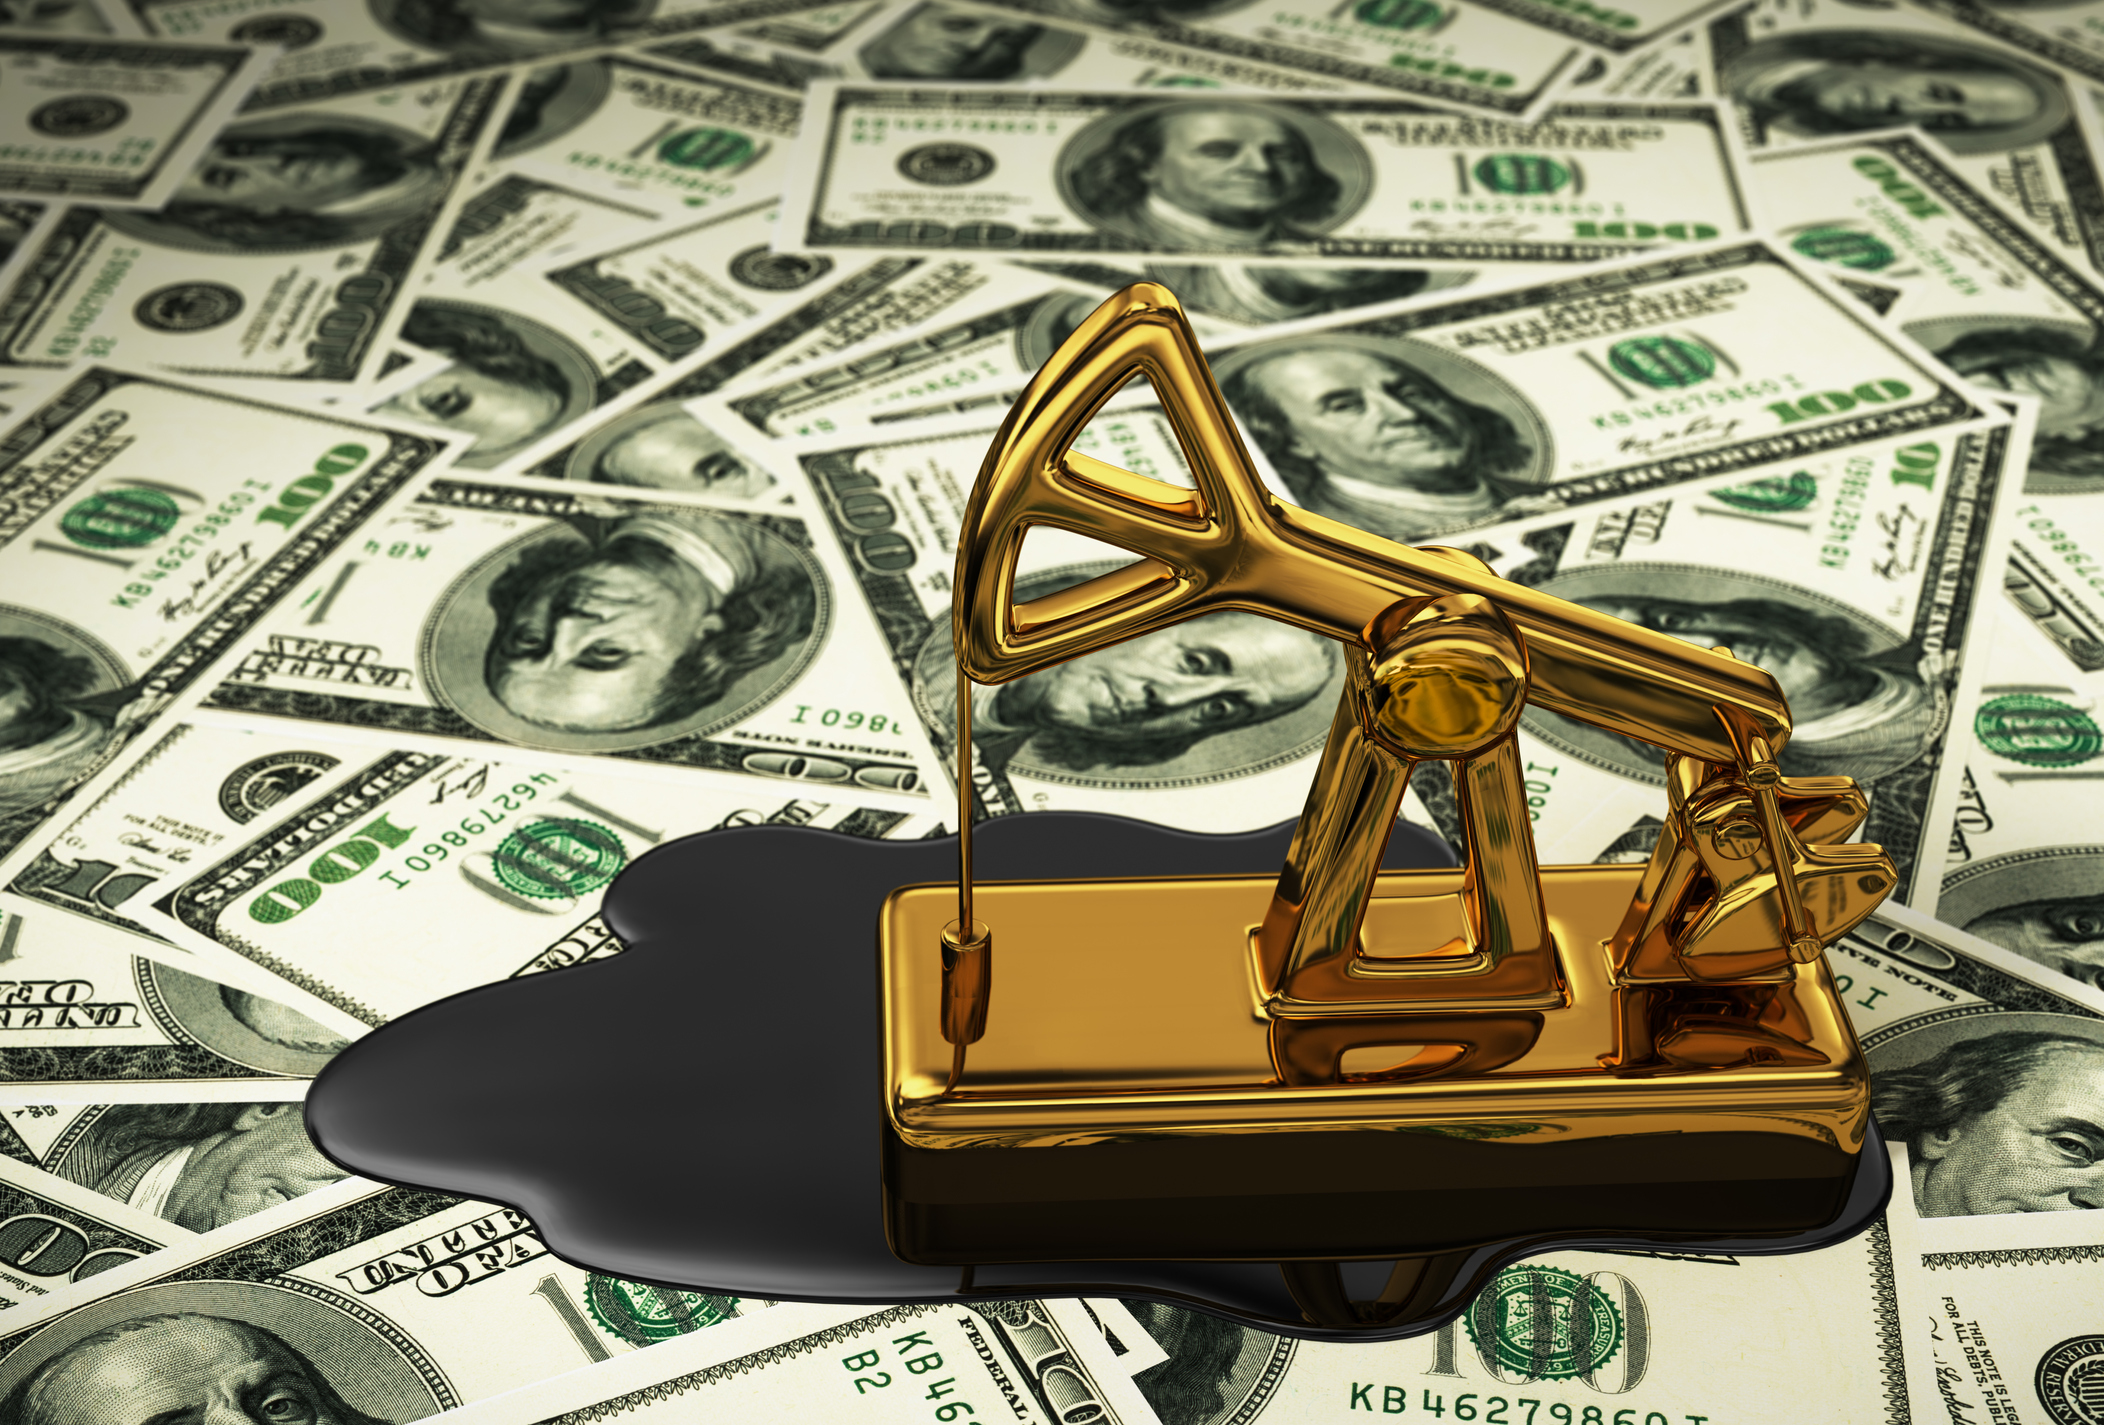 SEC Charges President of Oil and Gas Company for Misusing Retail Investor Funds